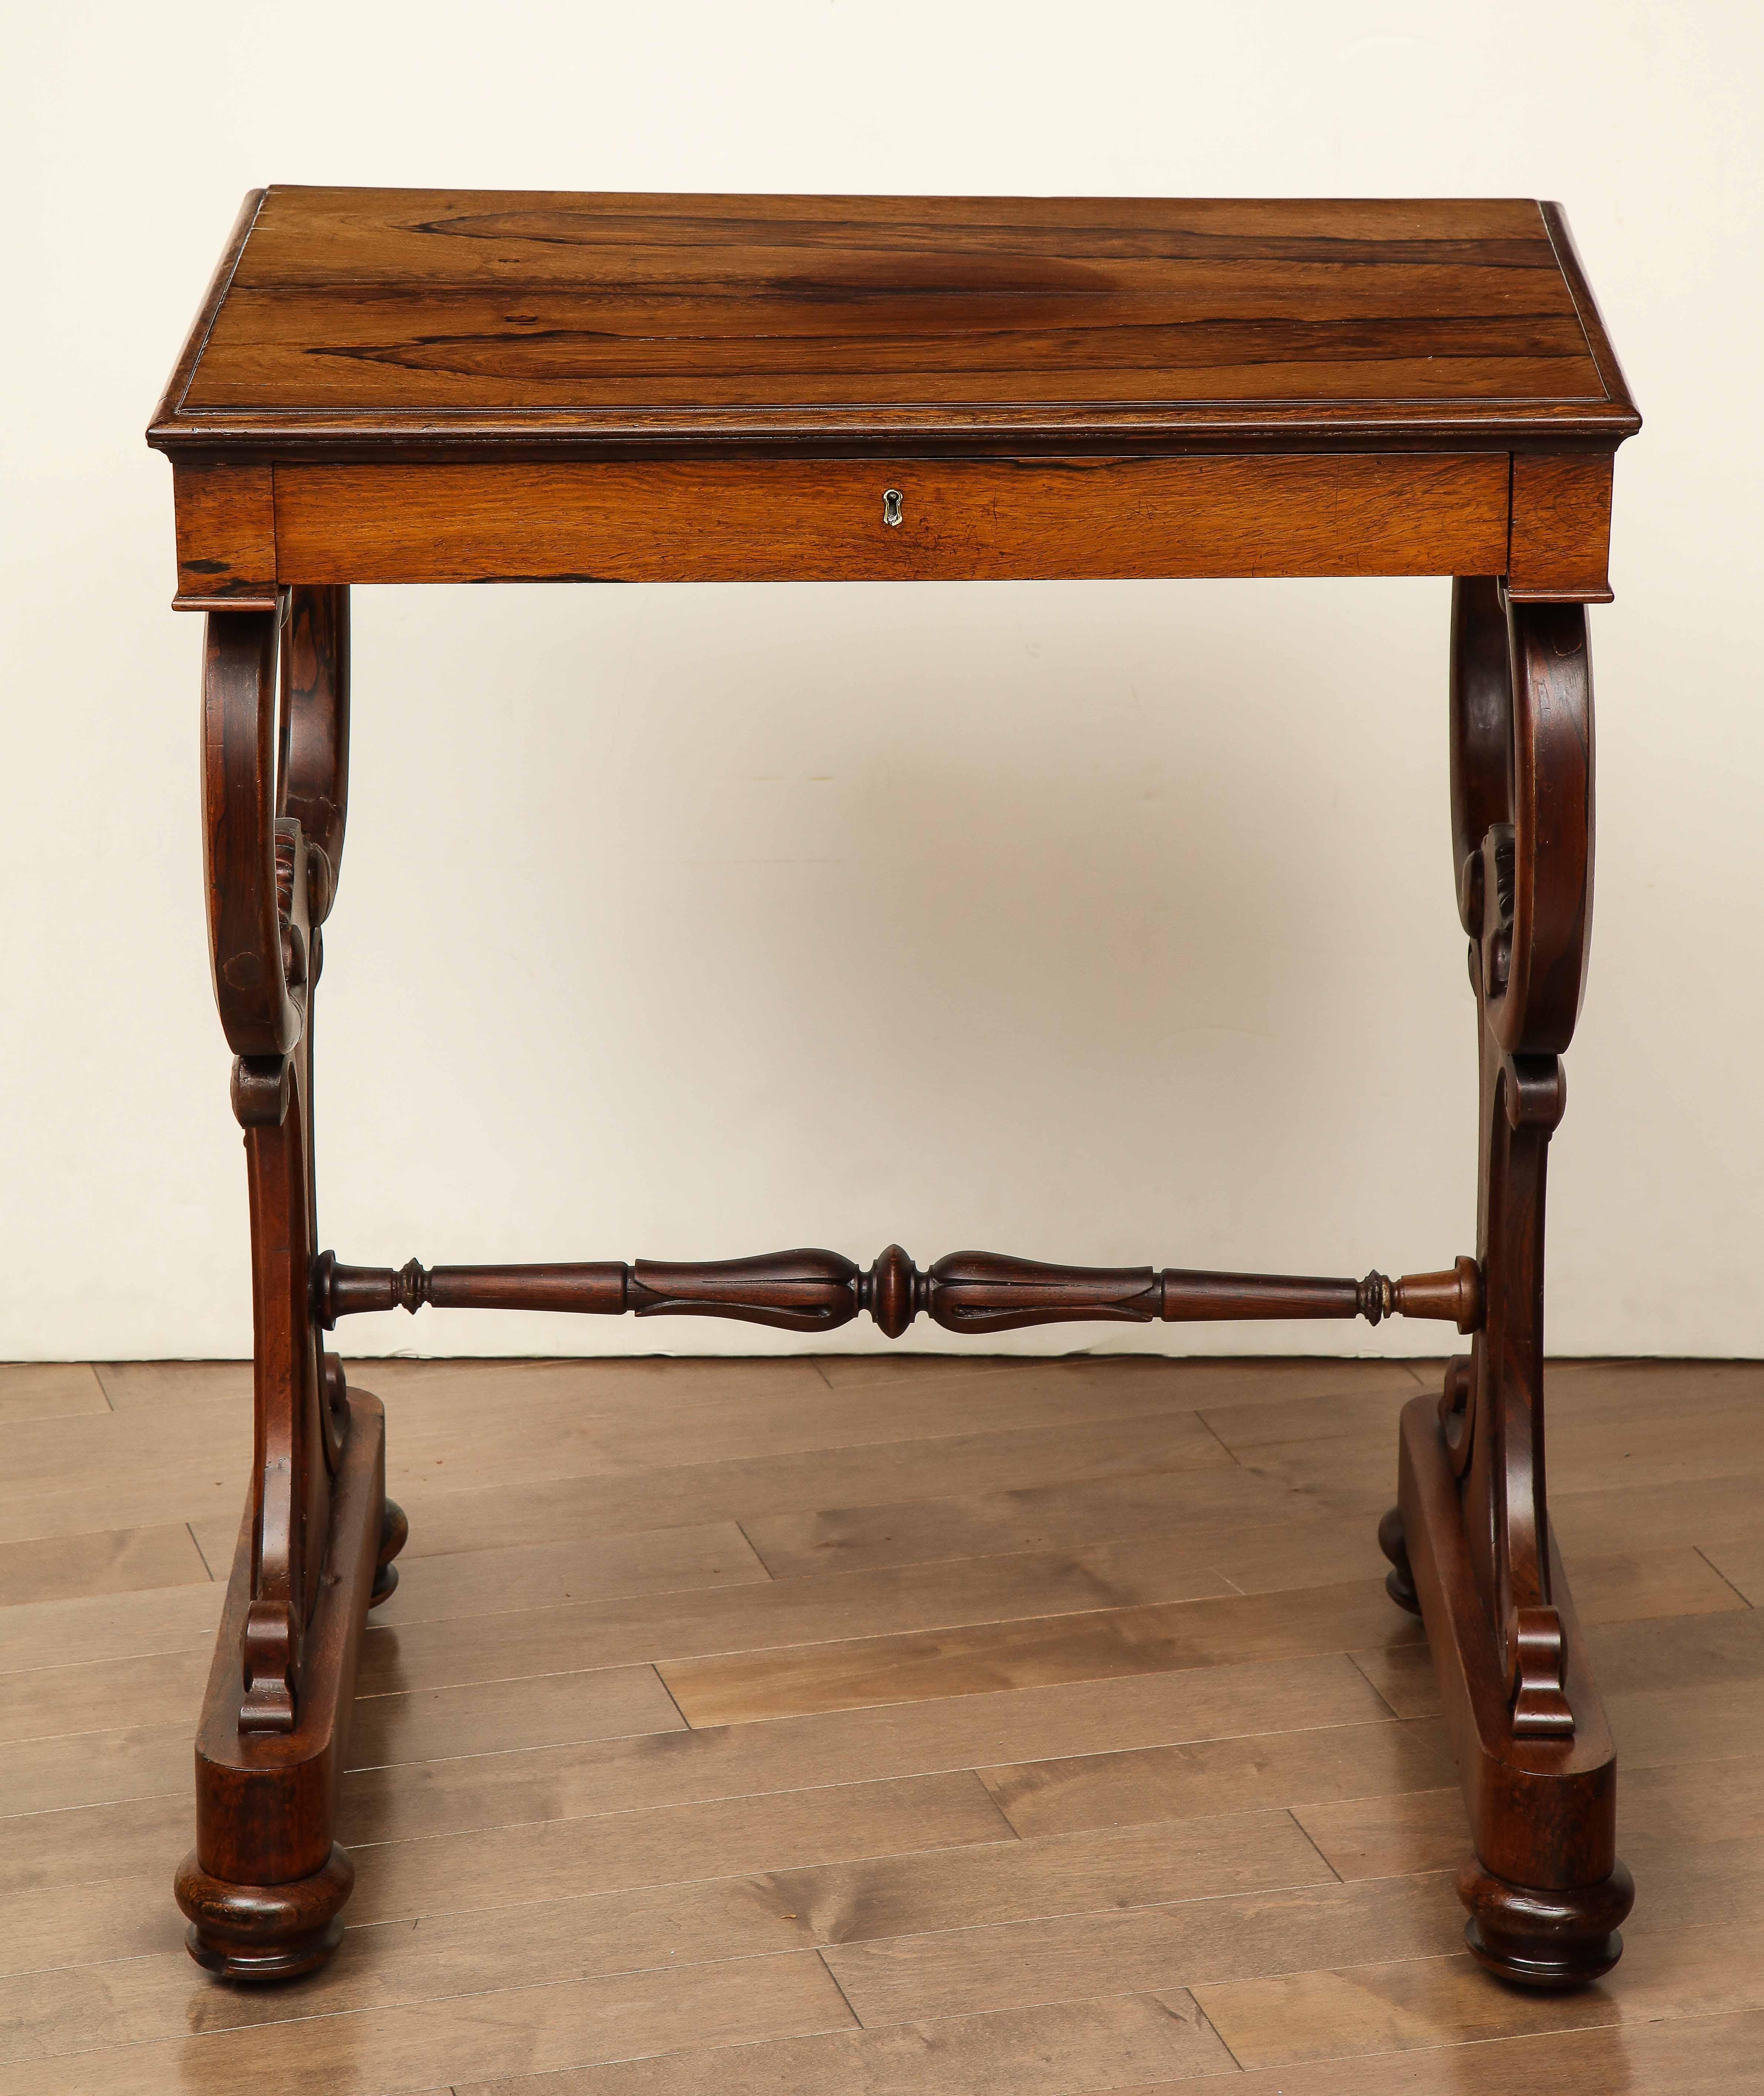 Mid-19th century English work table in Gonzales Alves.